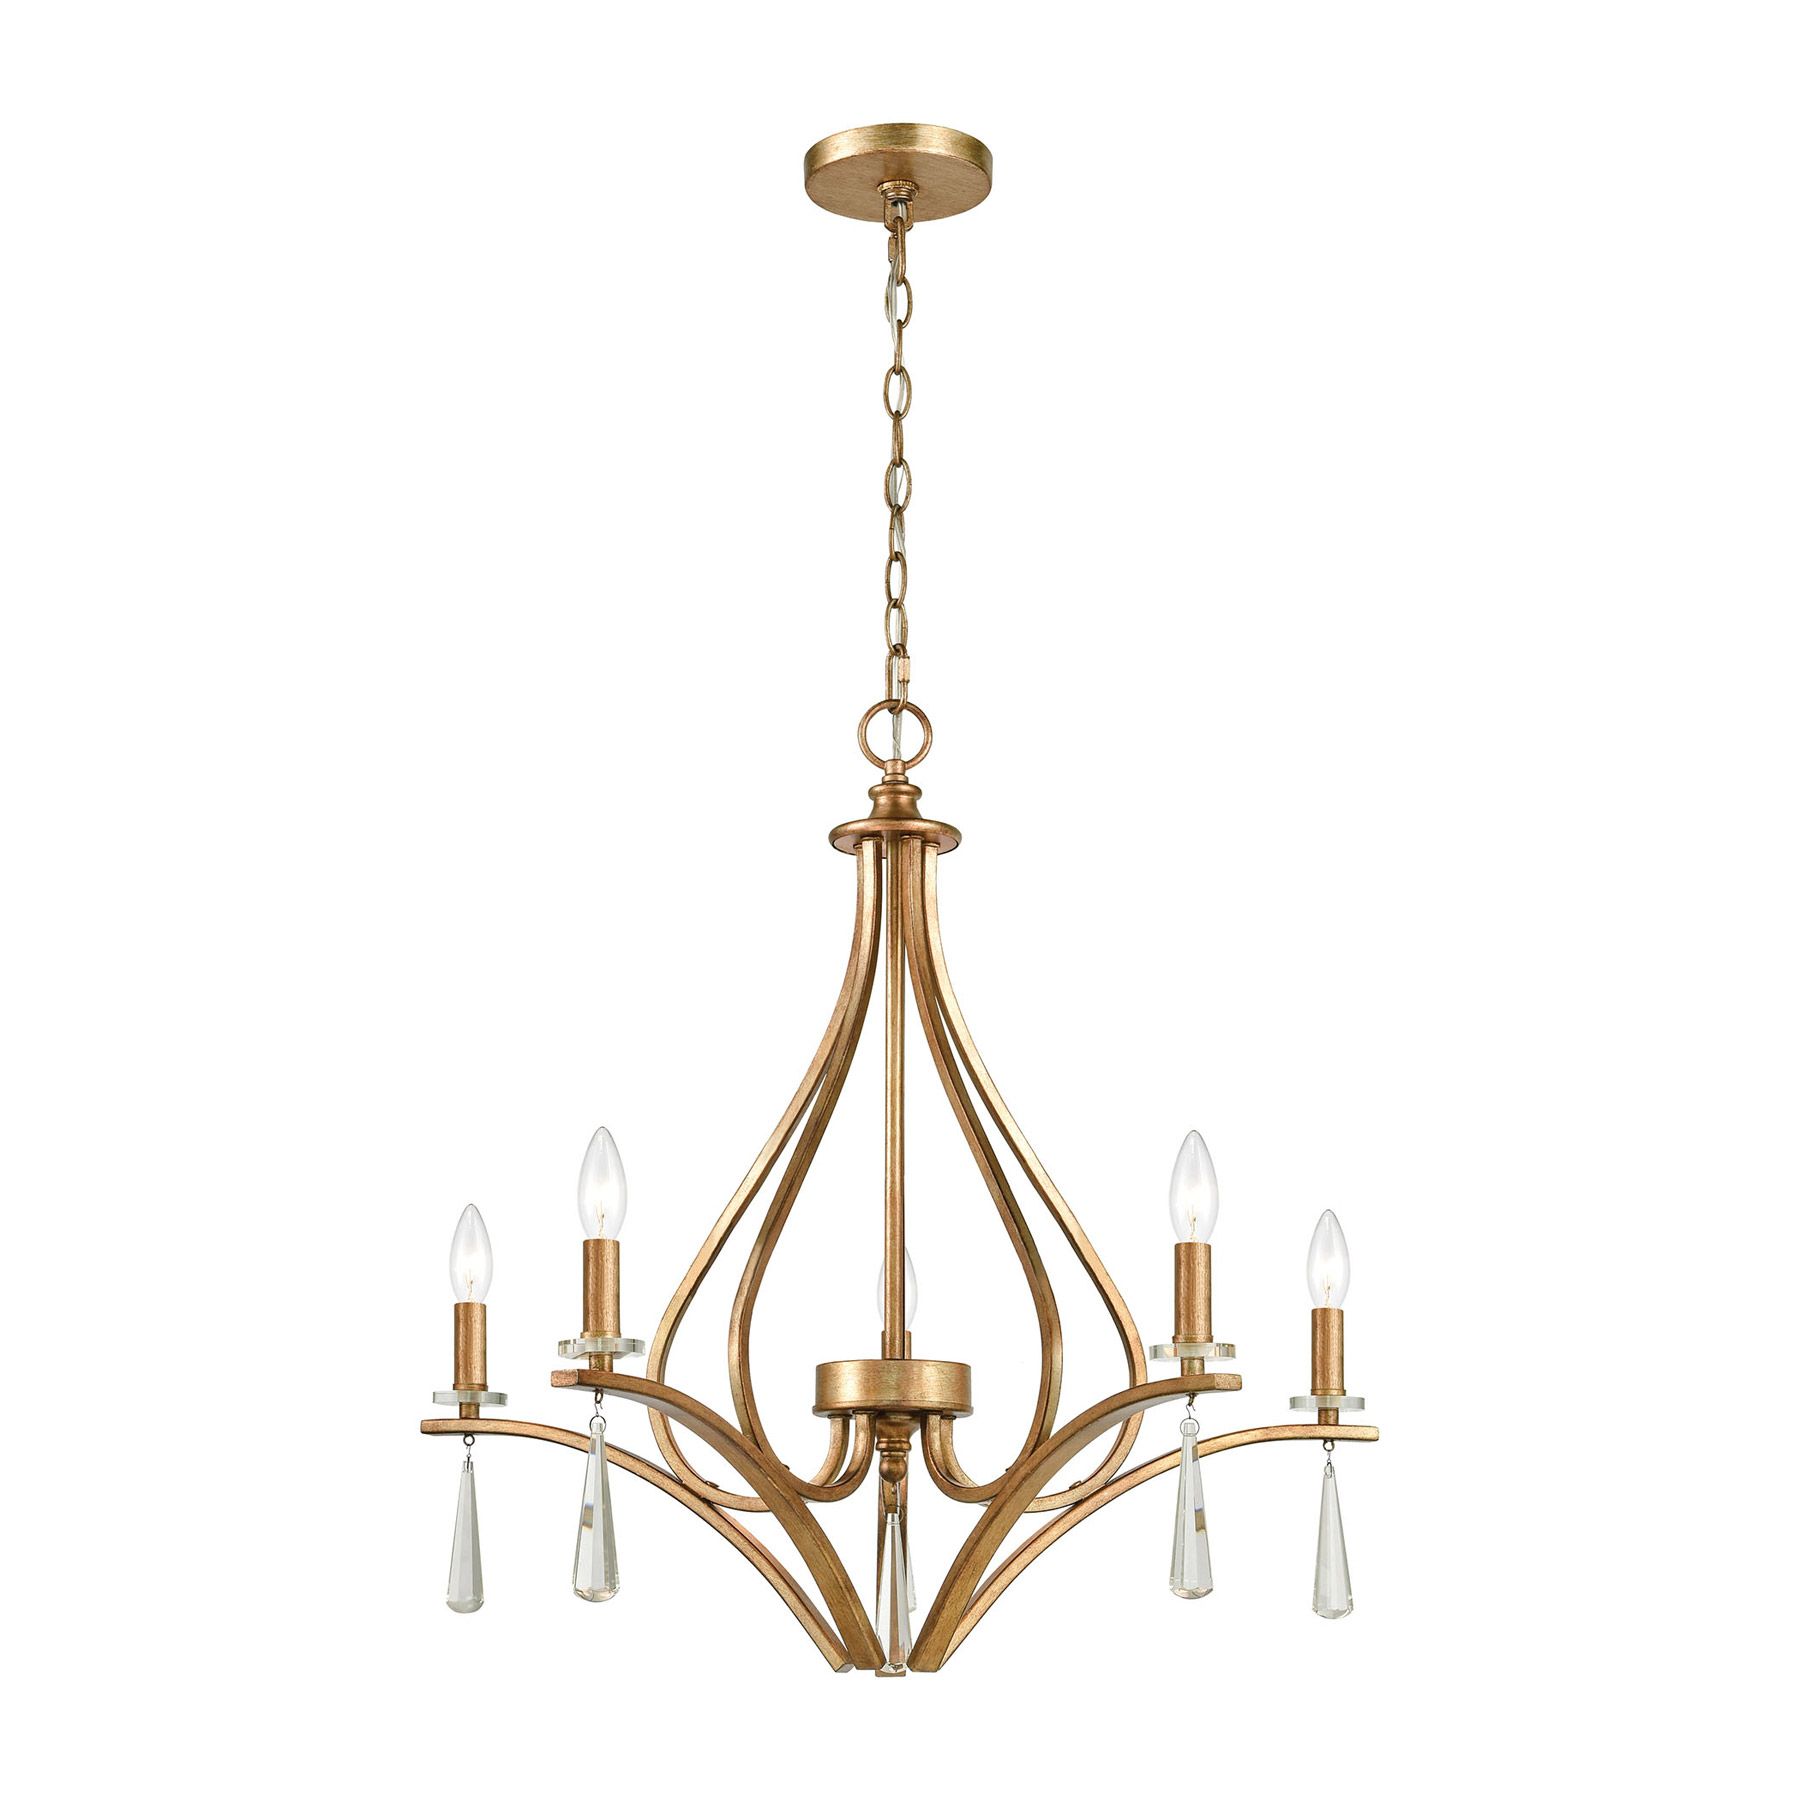 Antique Gold 18 Inch Four Light Chandeliers Regarding Famous Elk Lighting 75147/5 5 Light Chandelier In Antique Gold (View 4 of 20)